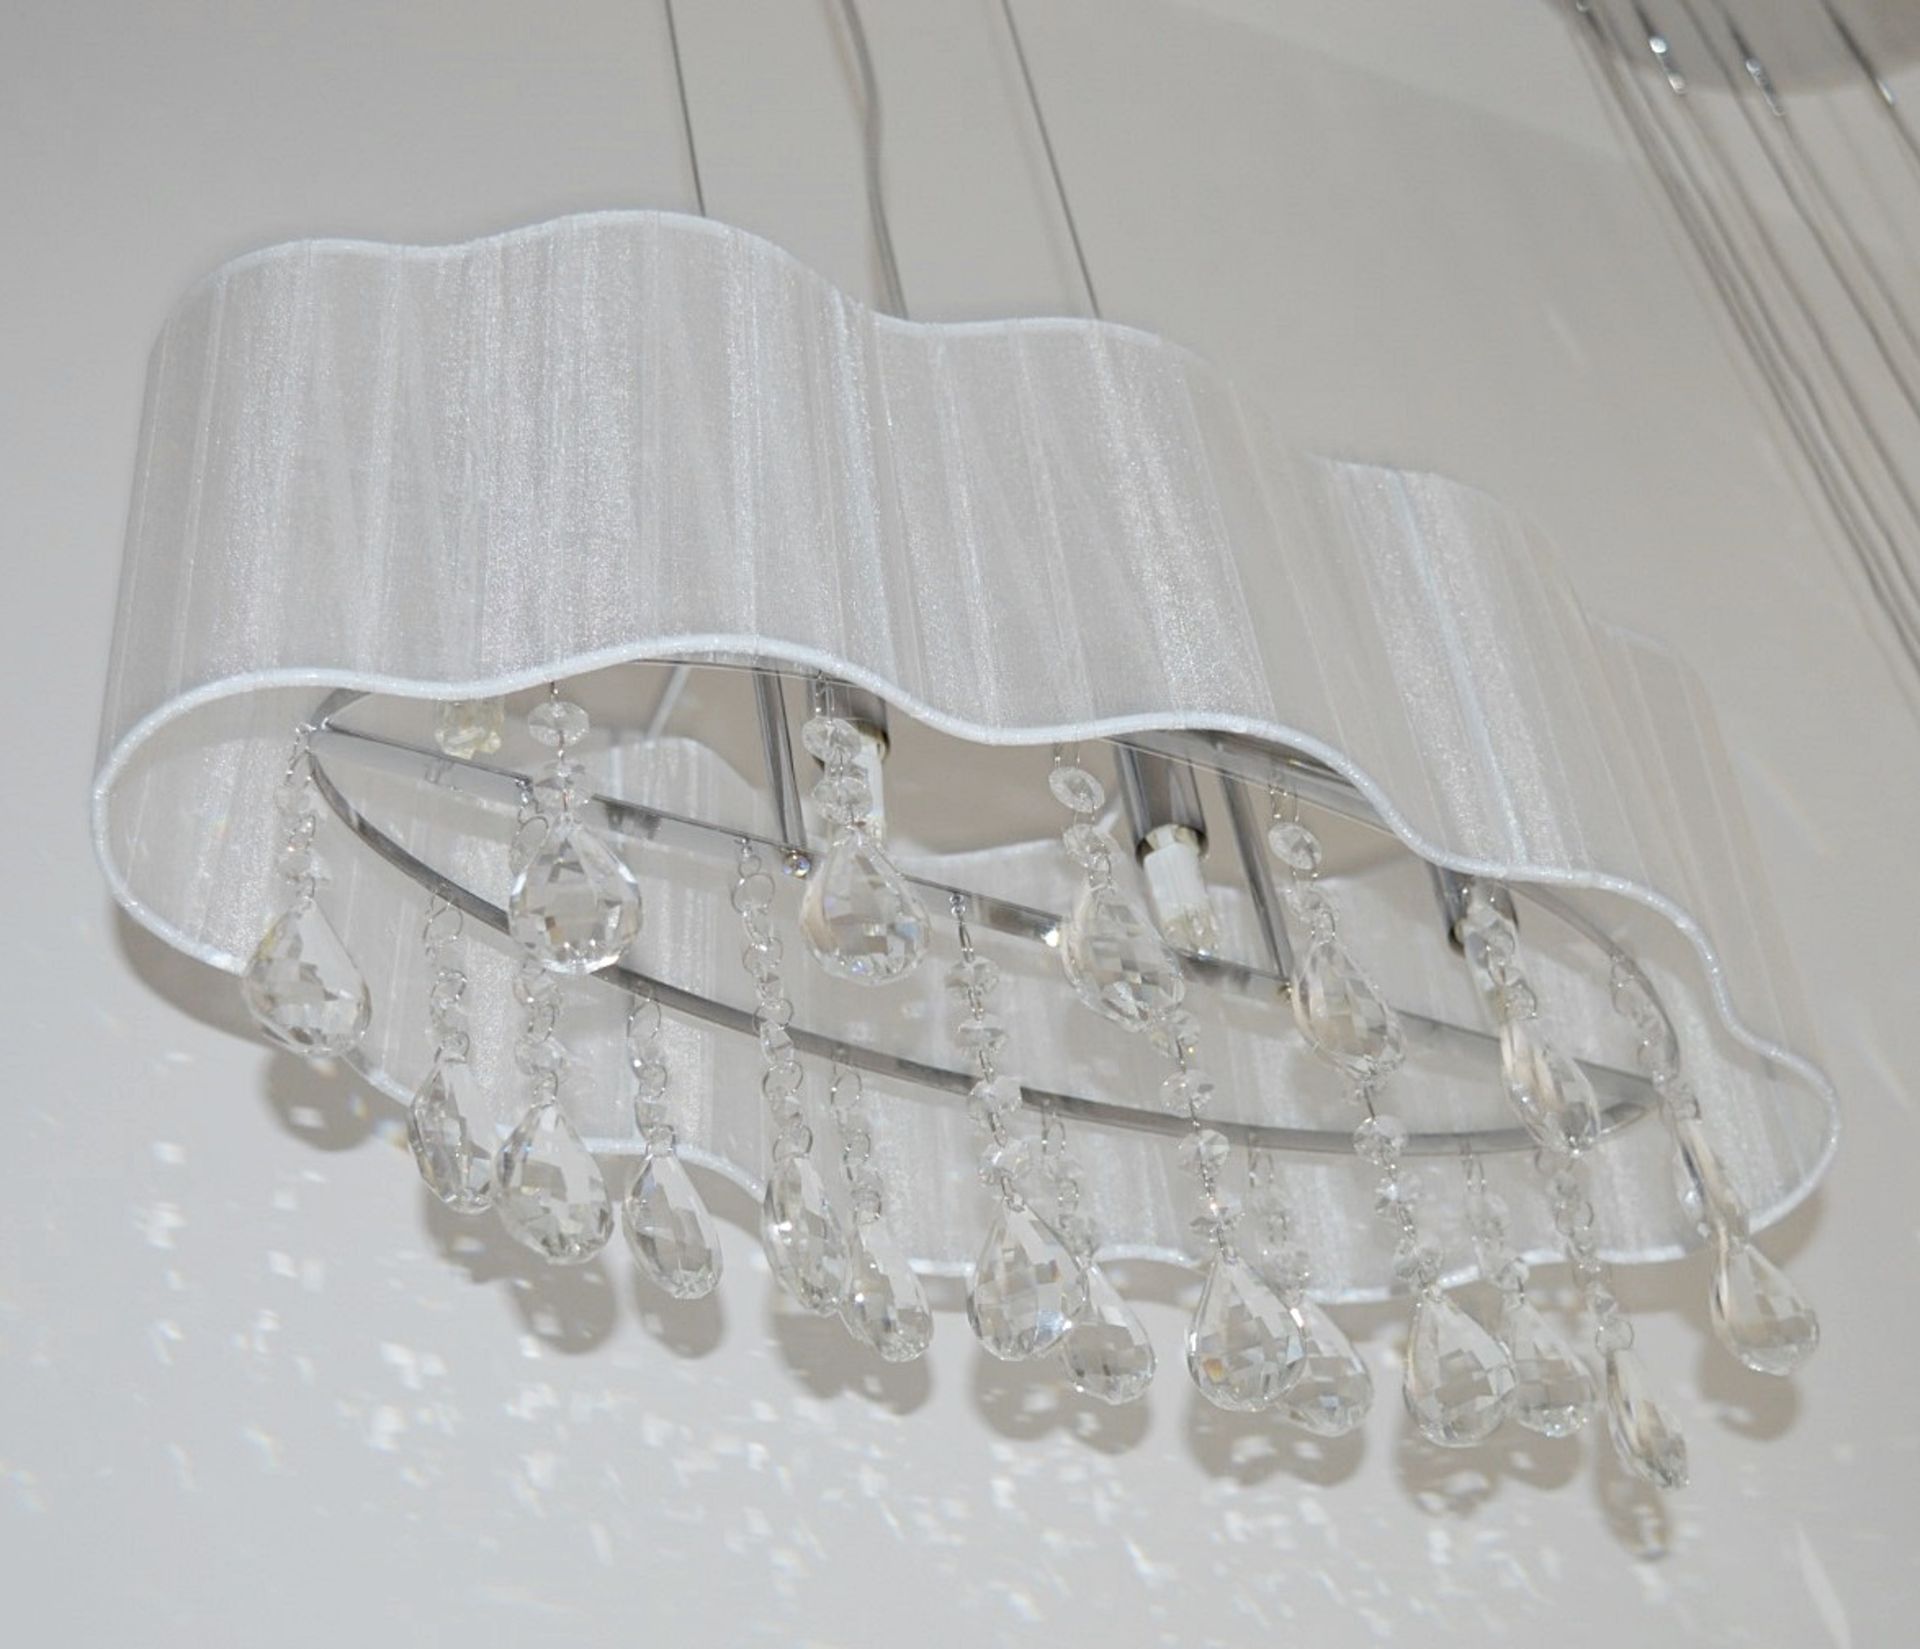 1 x Large Pleated 4-Light Ceiling Light With A Cream Voile Shade - RRP £147.84 - Image 3 of 3